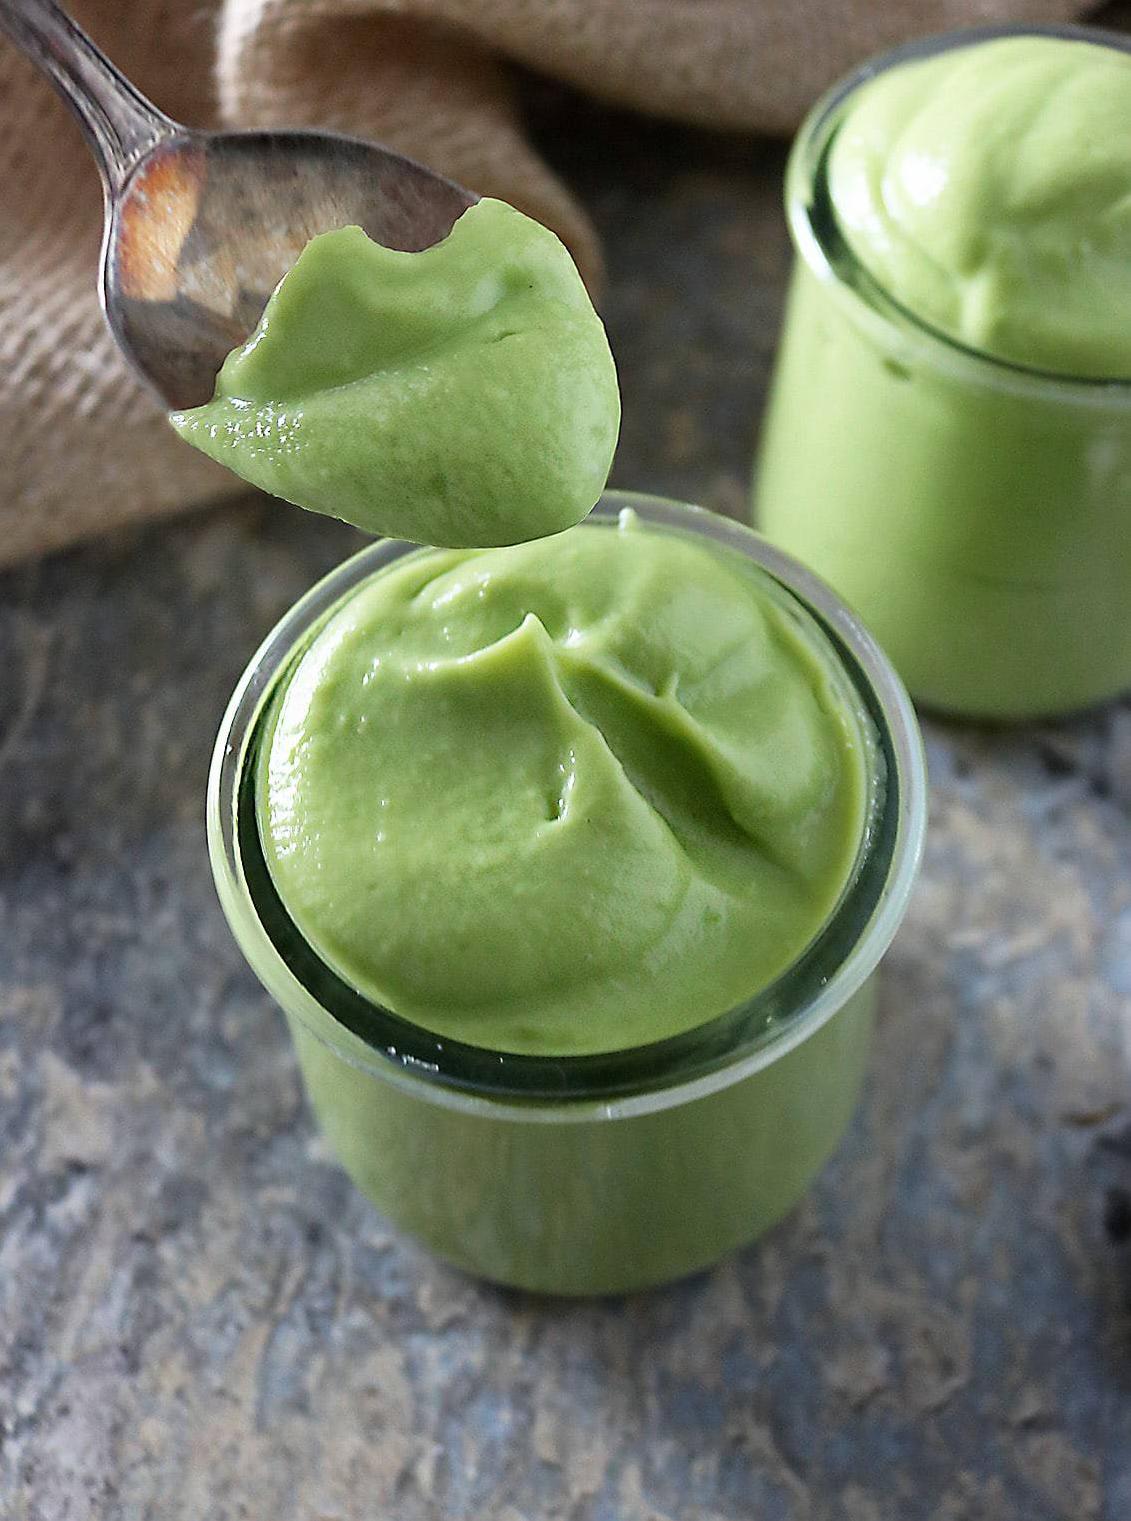  A guilt-free dessert that is full of healthy fats and nutrients